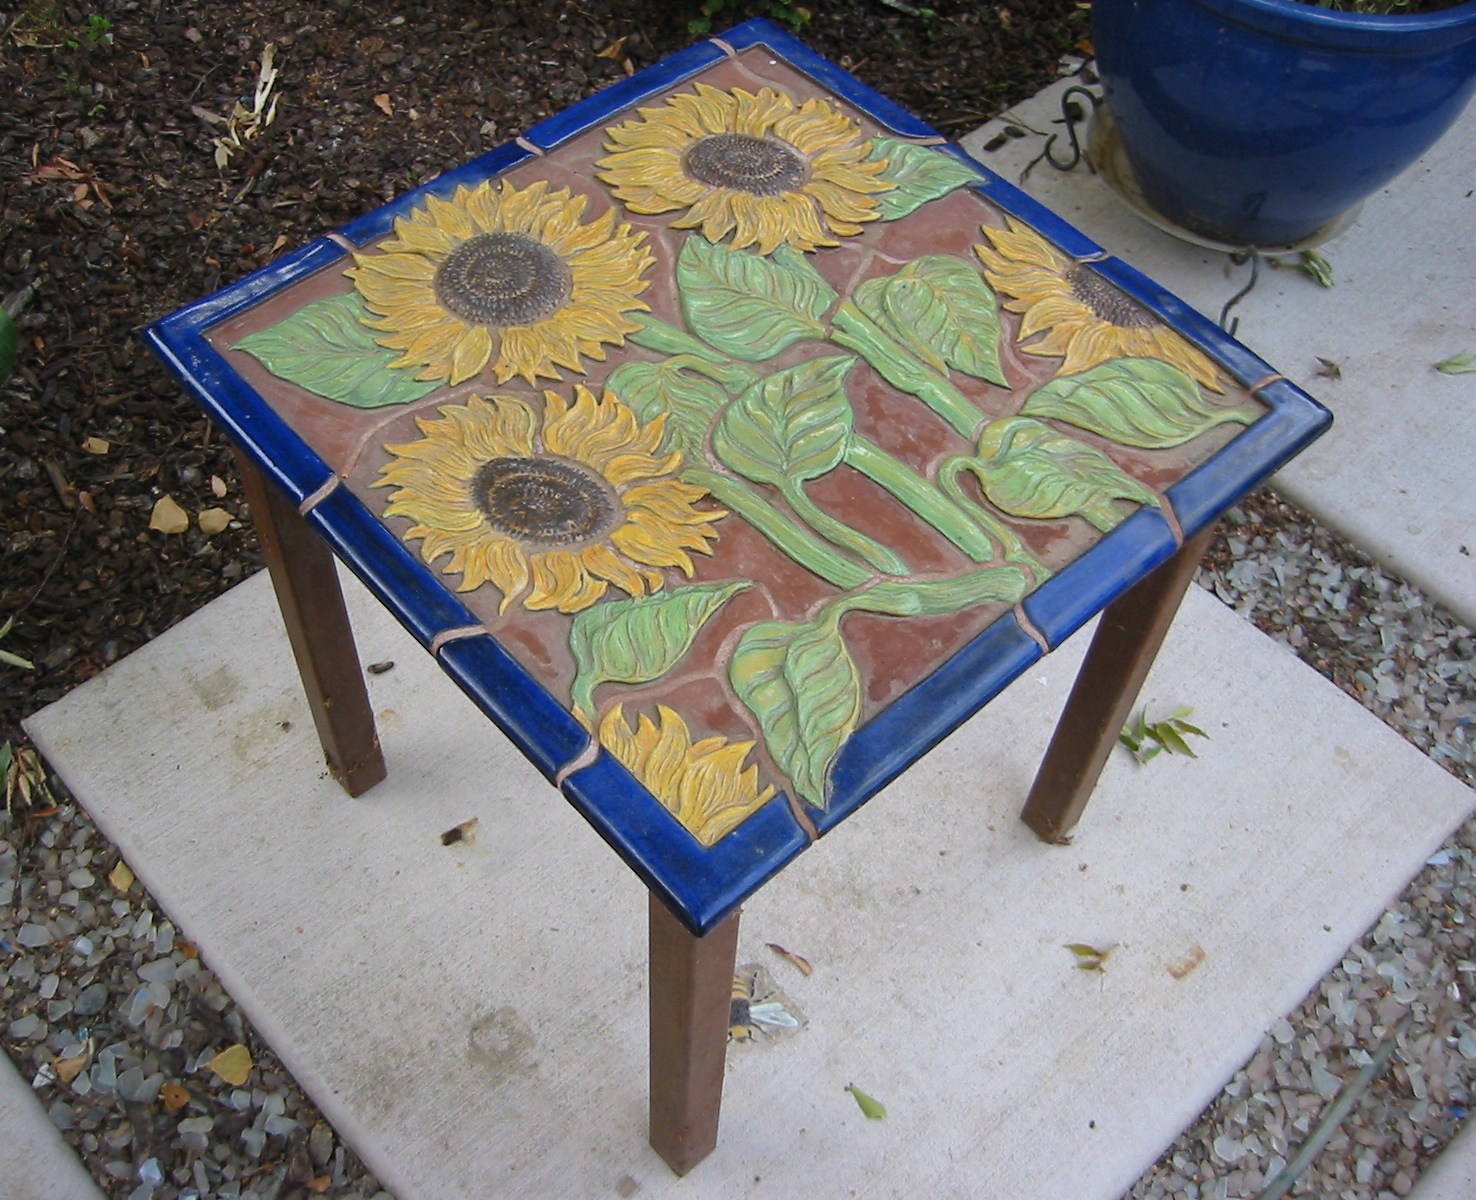 Carved Ceramic Table with Sunflower Design